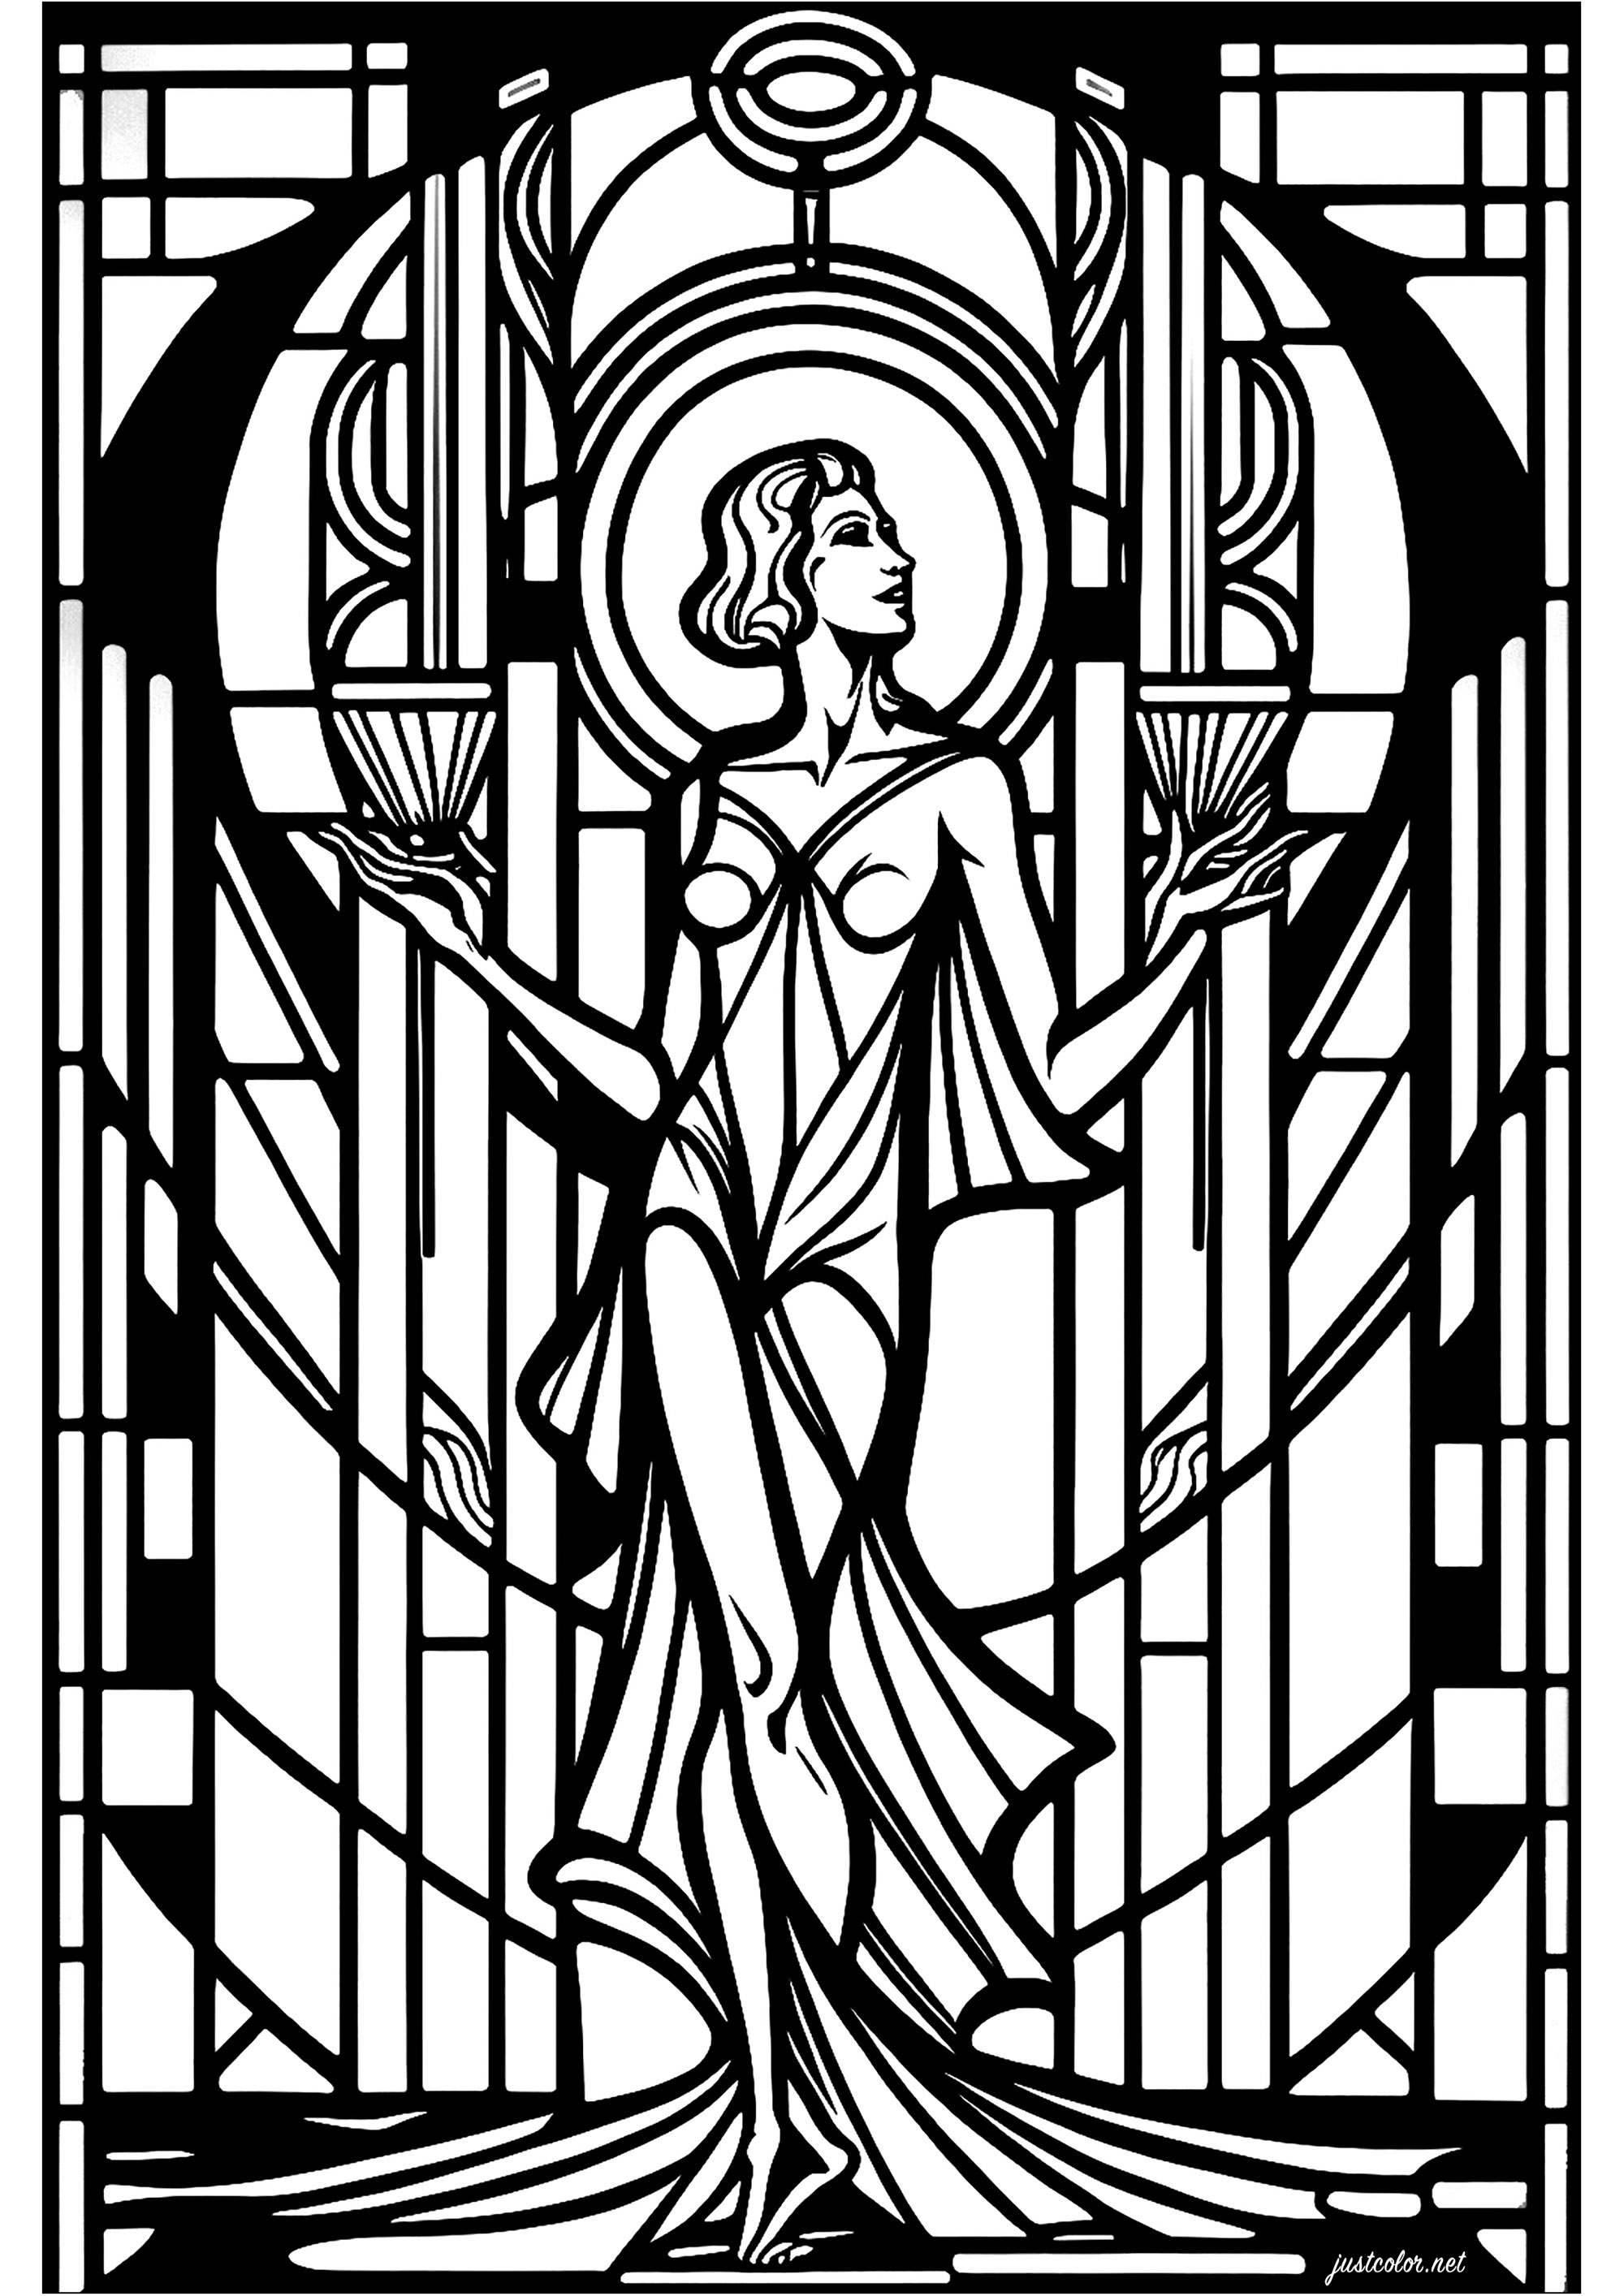 An Art Deco stained glass window representing an elegant woman. This coloring page shows a woman in Art Deco style, as one might see her in a stained glass window. She is shown in an elegant pose, the details are numerous and precise, and the result is very beautiful. Thick lines and geometric shapes are used to create a stained glass effect.